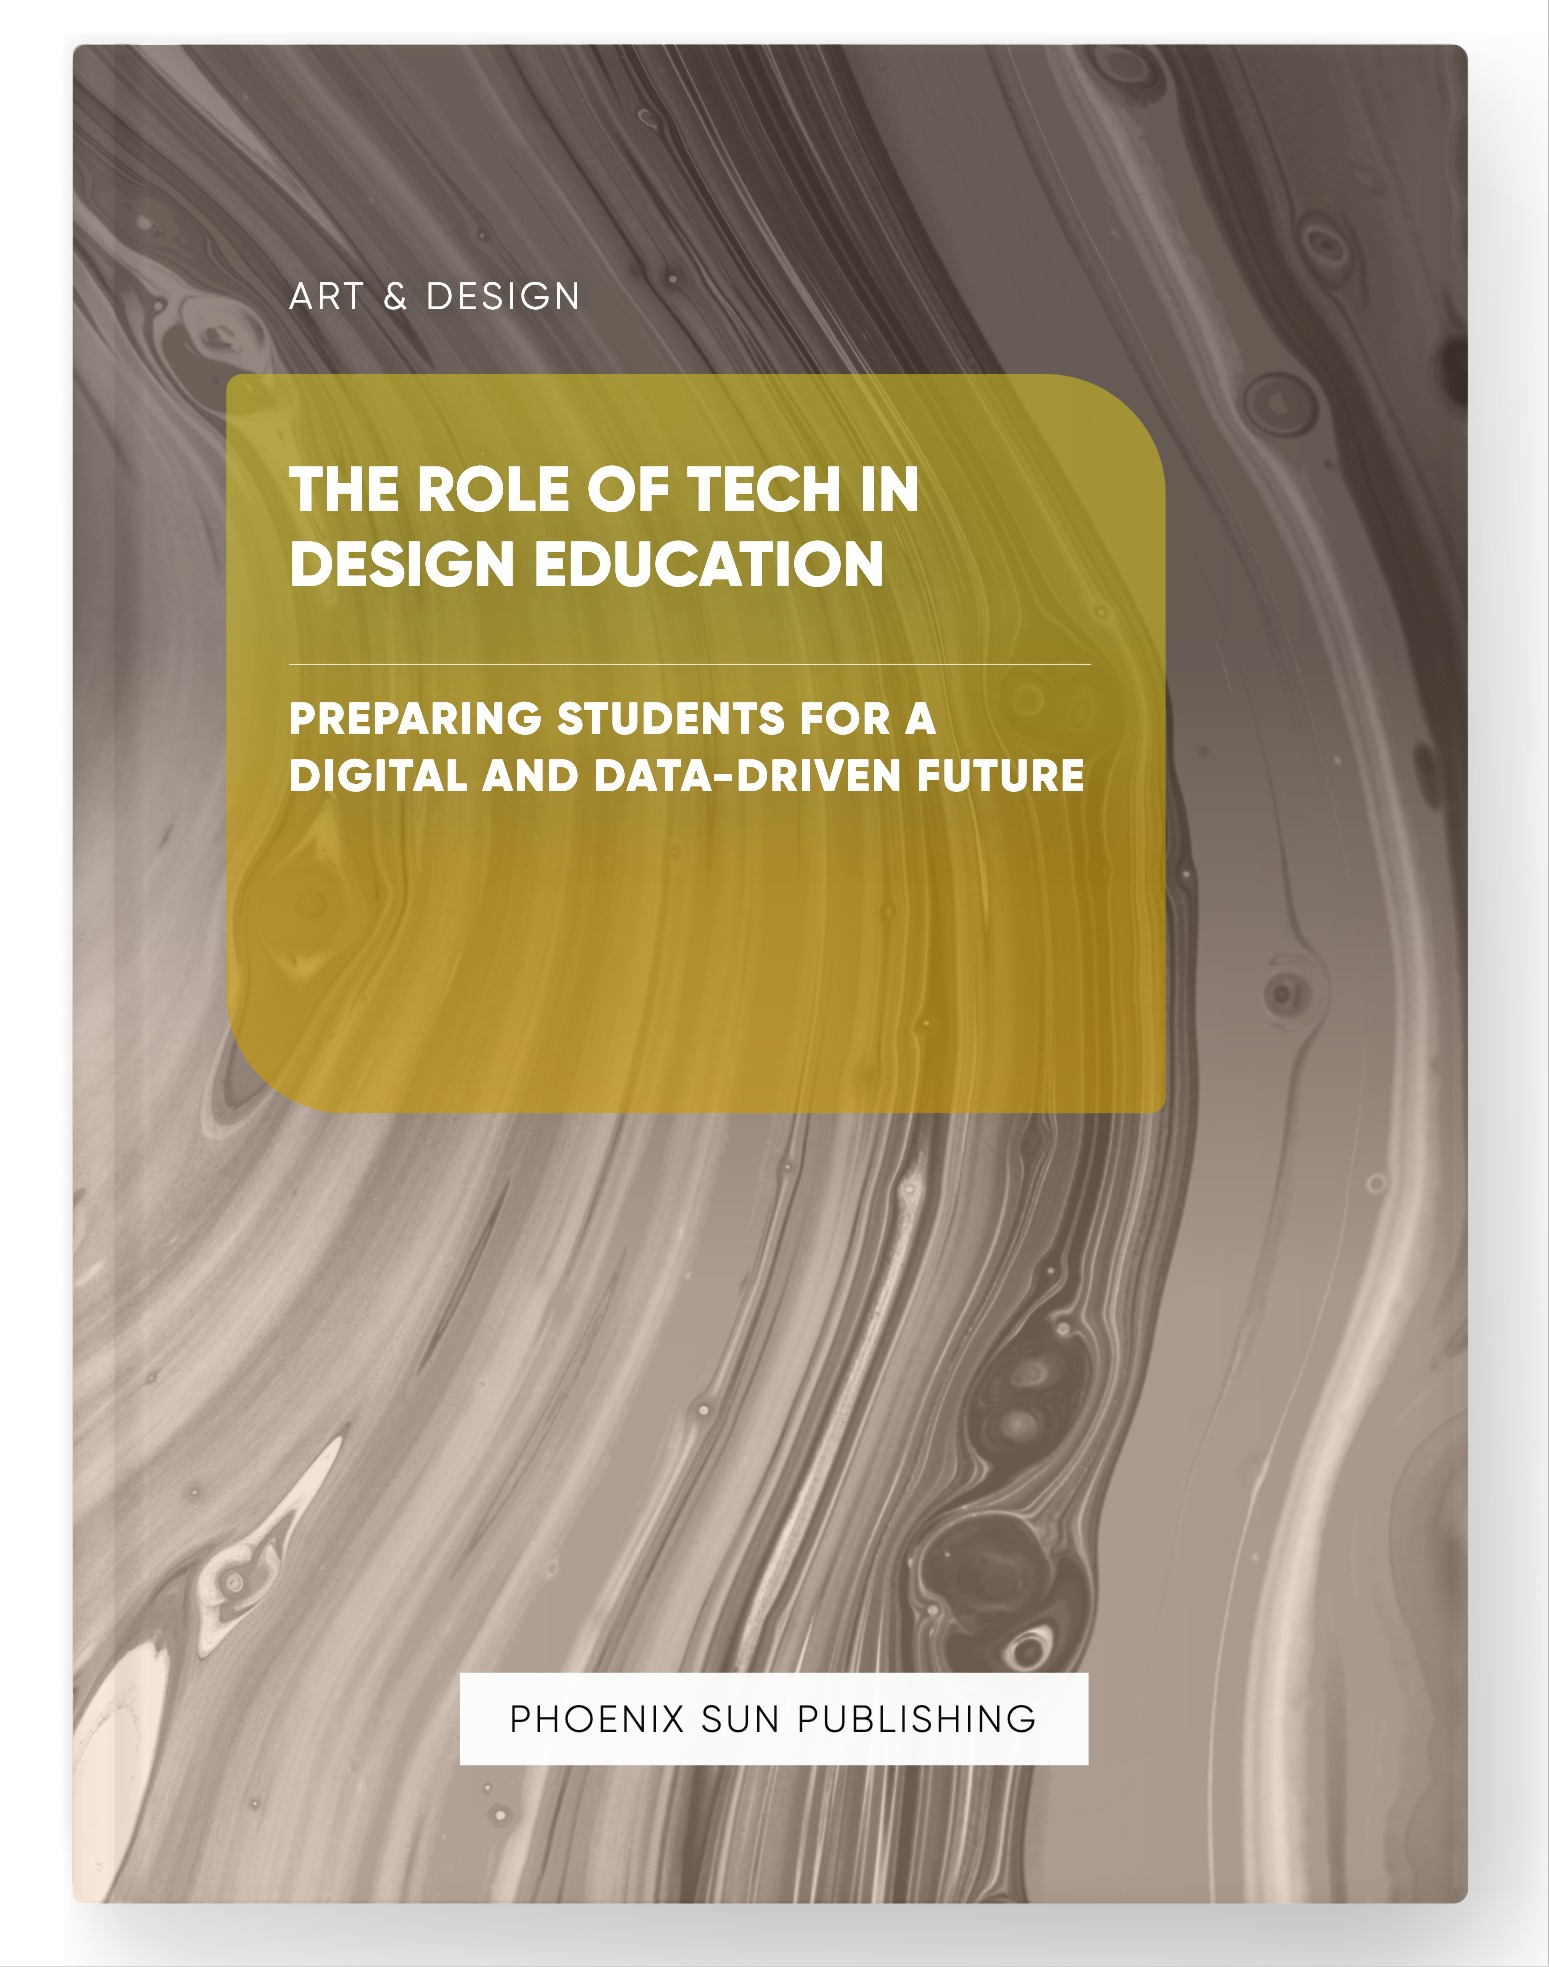 The Role of Tech in Design Education – Preparing Students for a Digital and Data-Driven Future